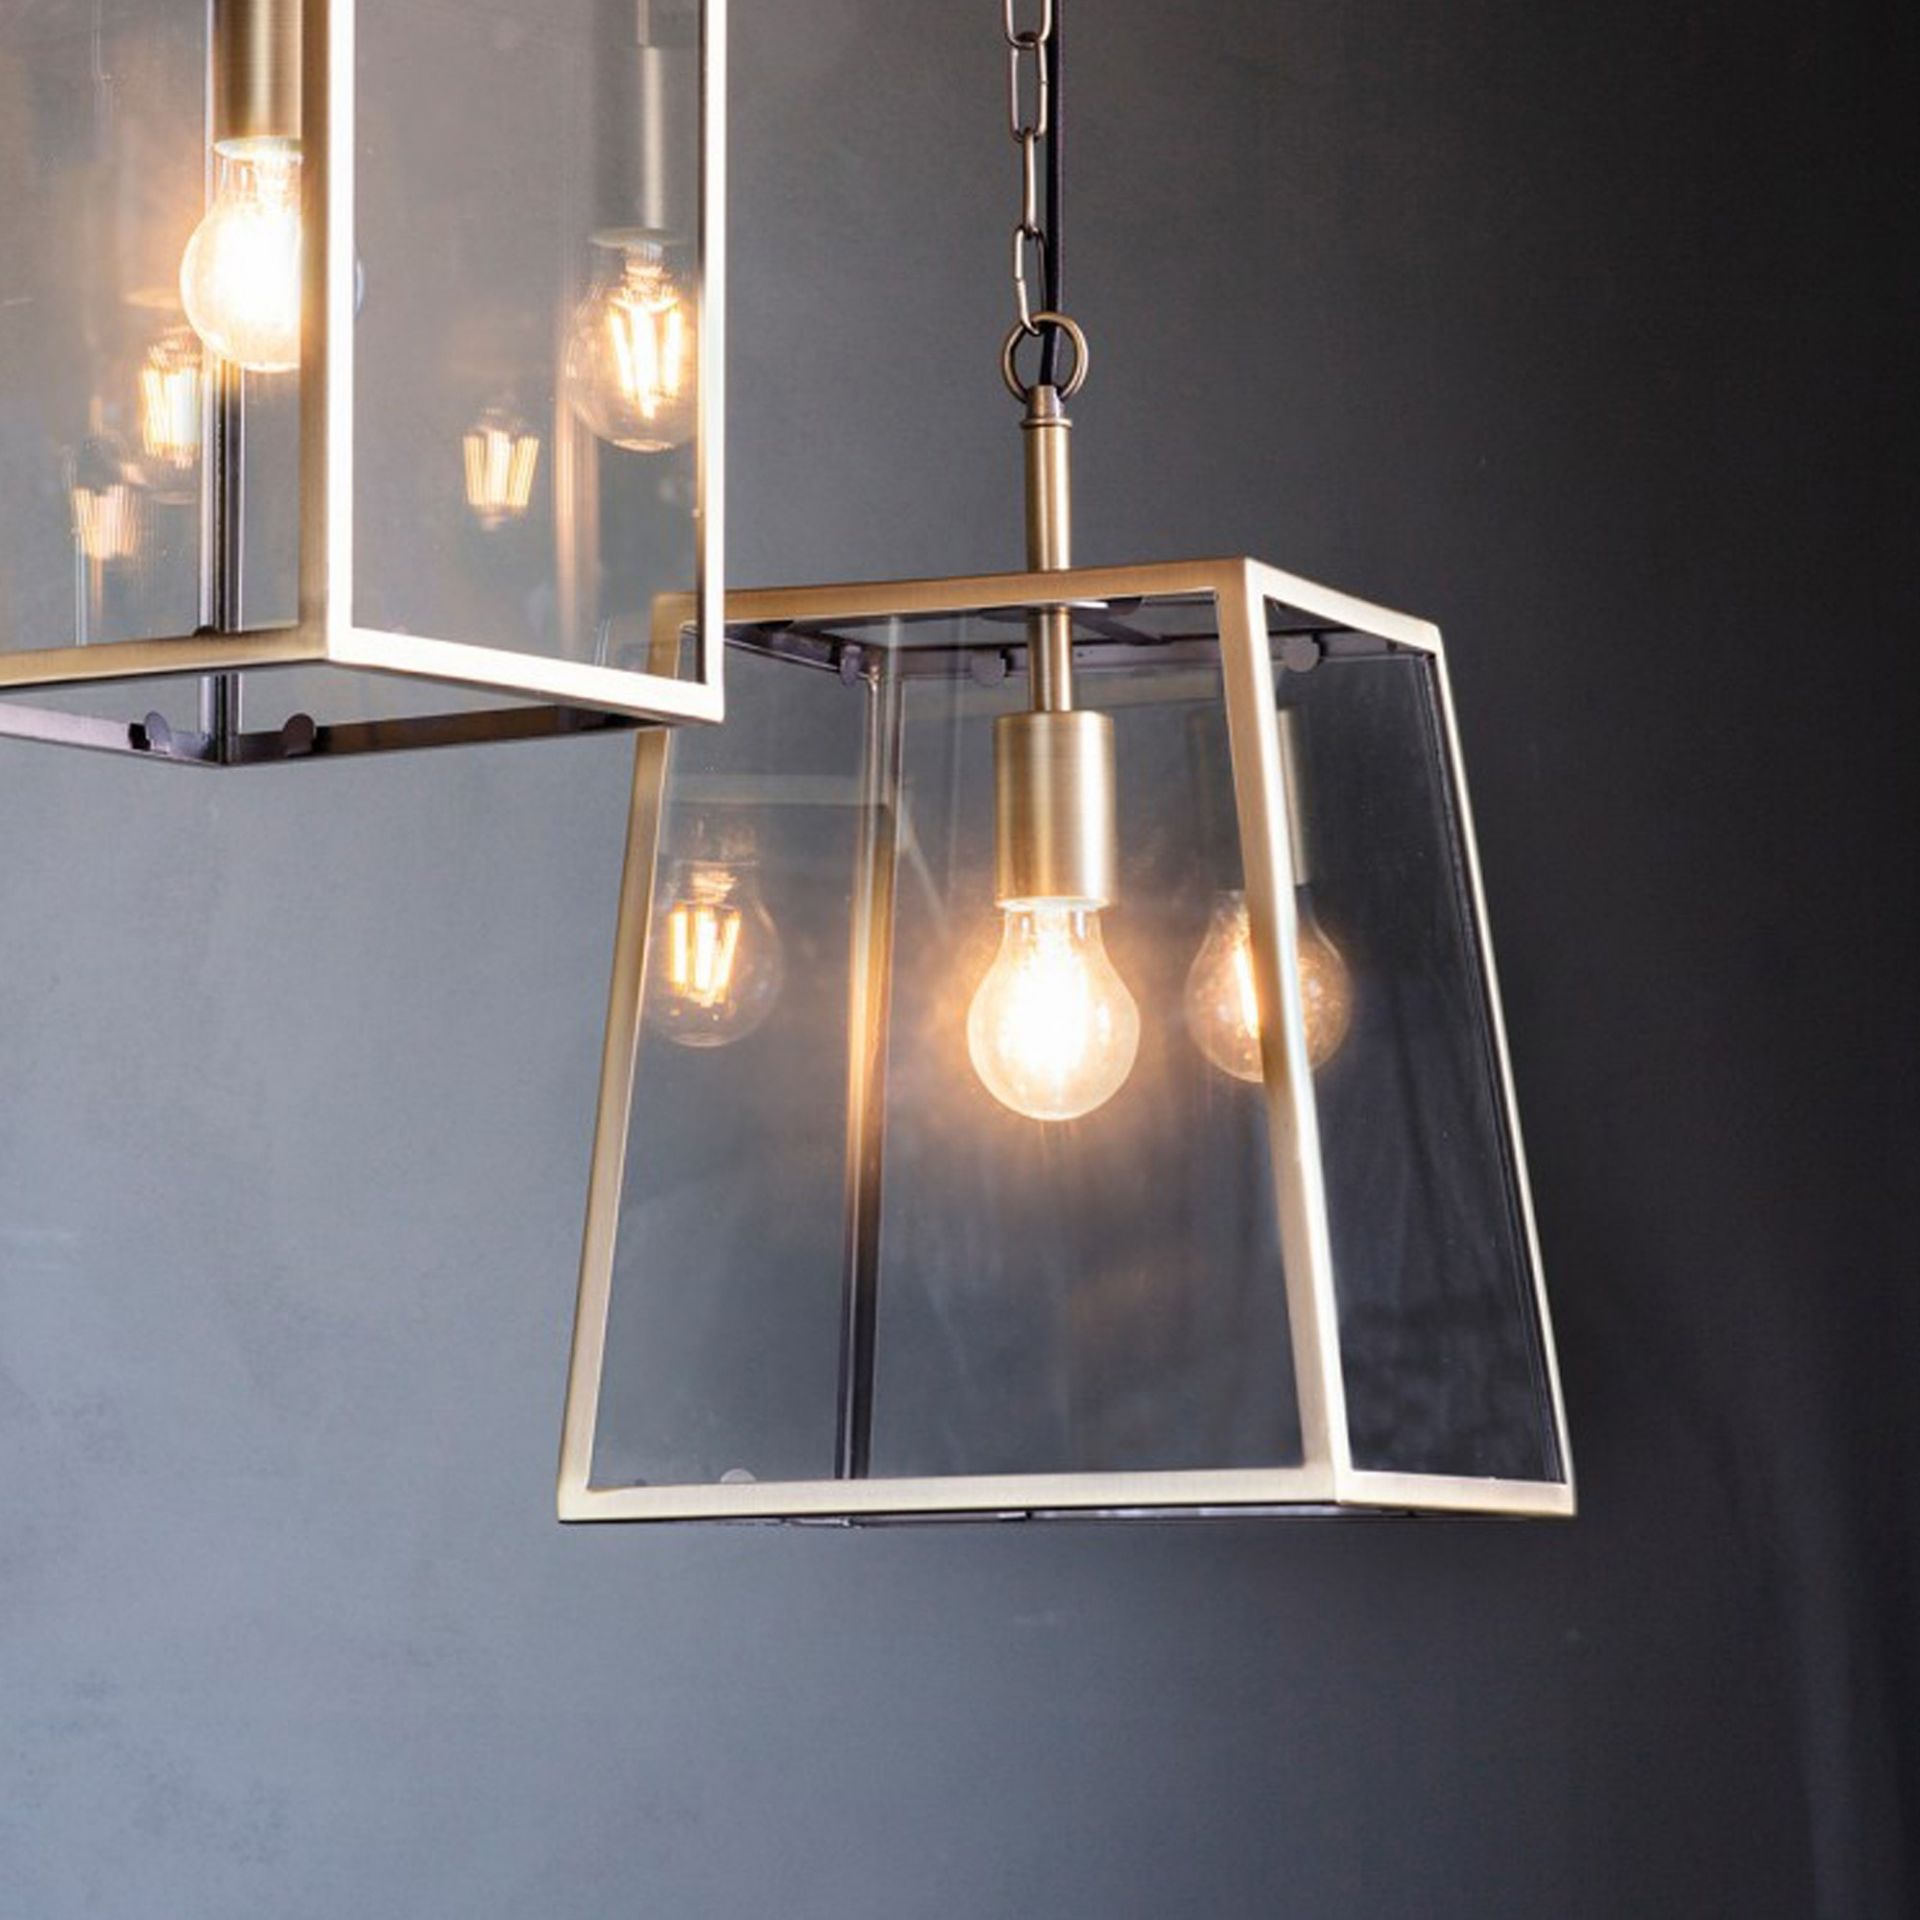 Hellier Pendant Light Modernise your home and get more of an on-trend look with this stunning